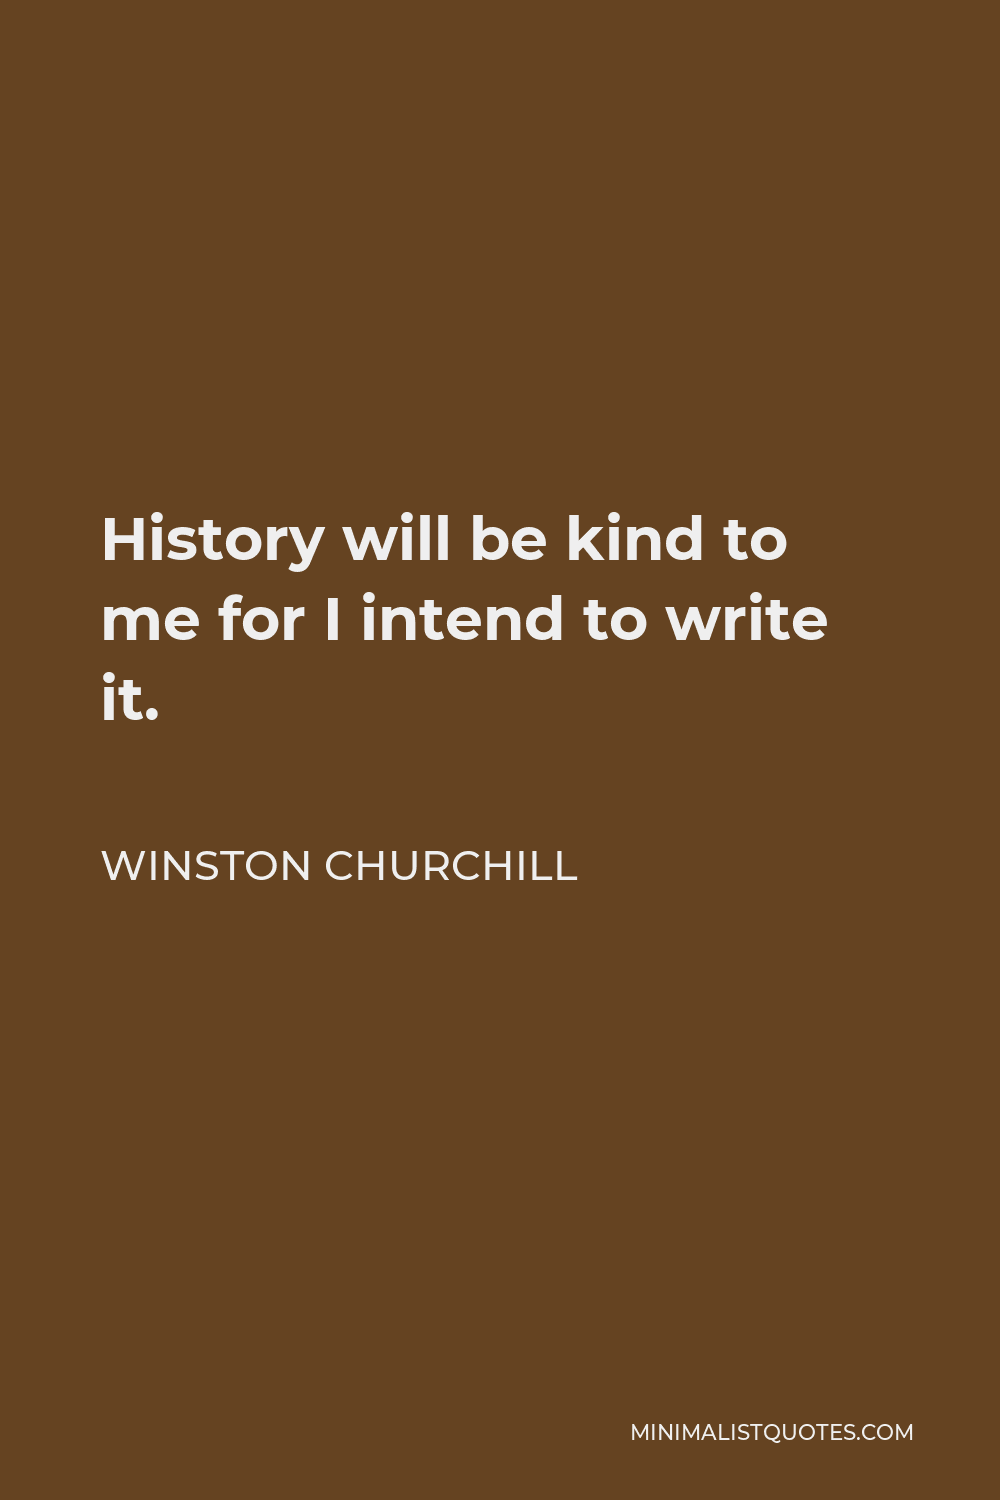 Winston Churchill Quote - History will be kind to me for I intend to write it.